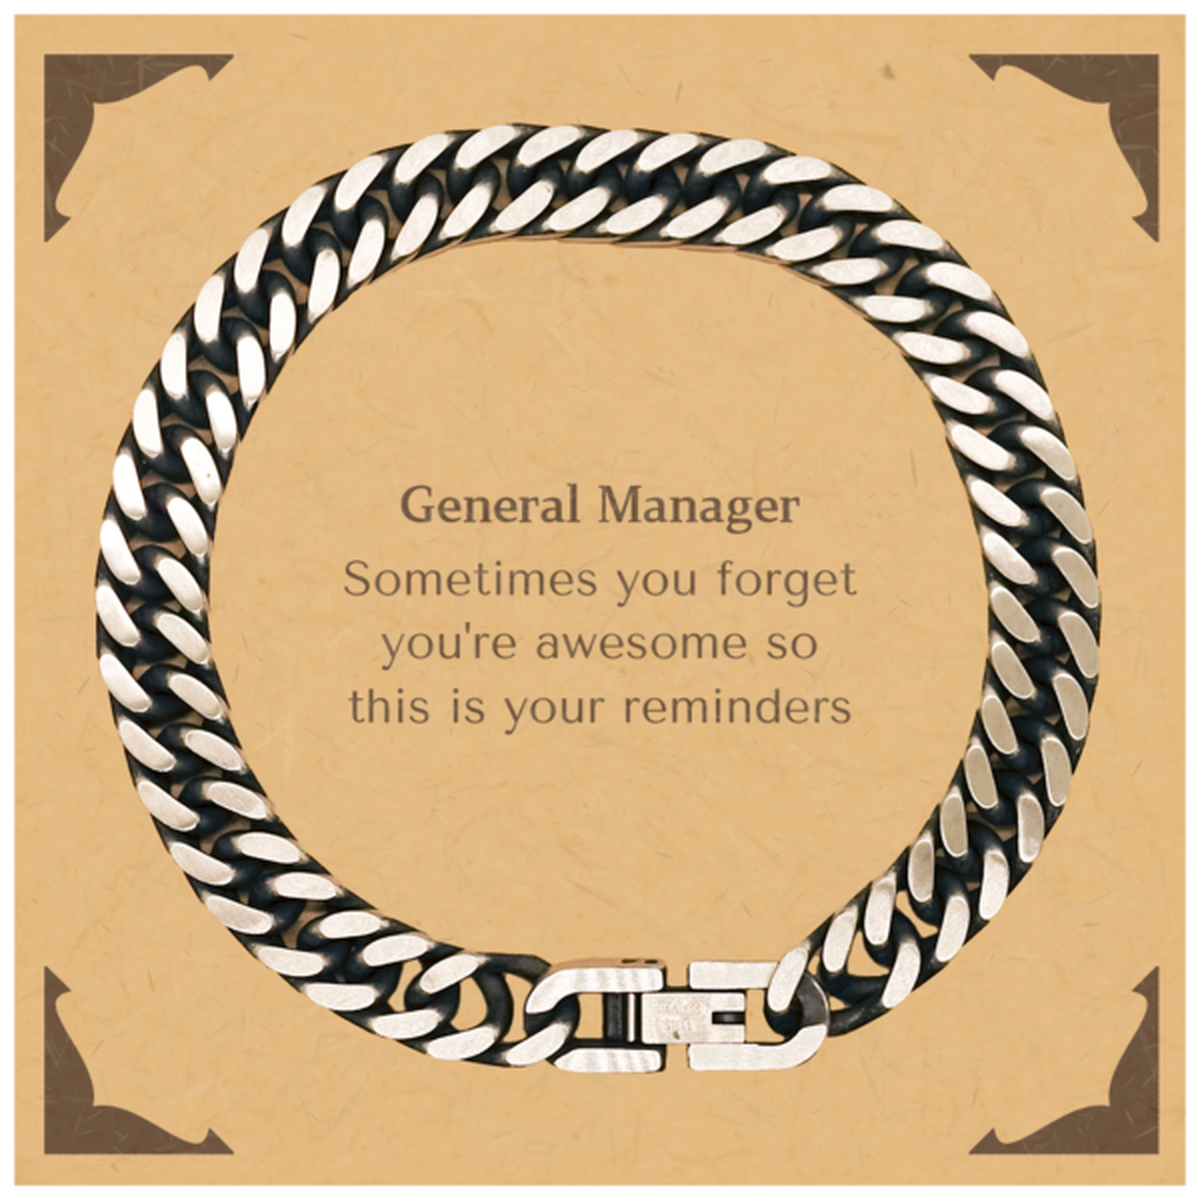 Sentimental General Manager Cuban Link Chain Bracelet, General Manager Sometimes you forget you're awesome so this is your reminders, Graduation Christmas Birthday Gifts for General Manager, Men, Women, Coworkers